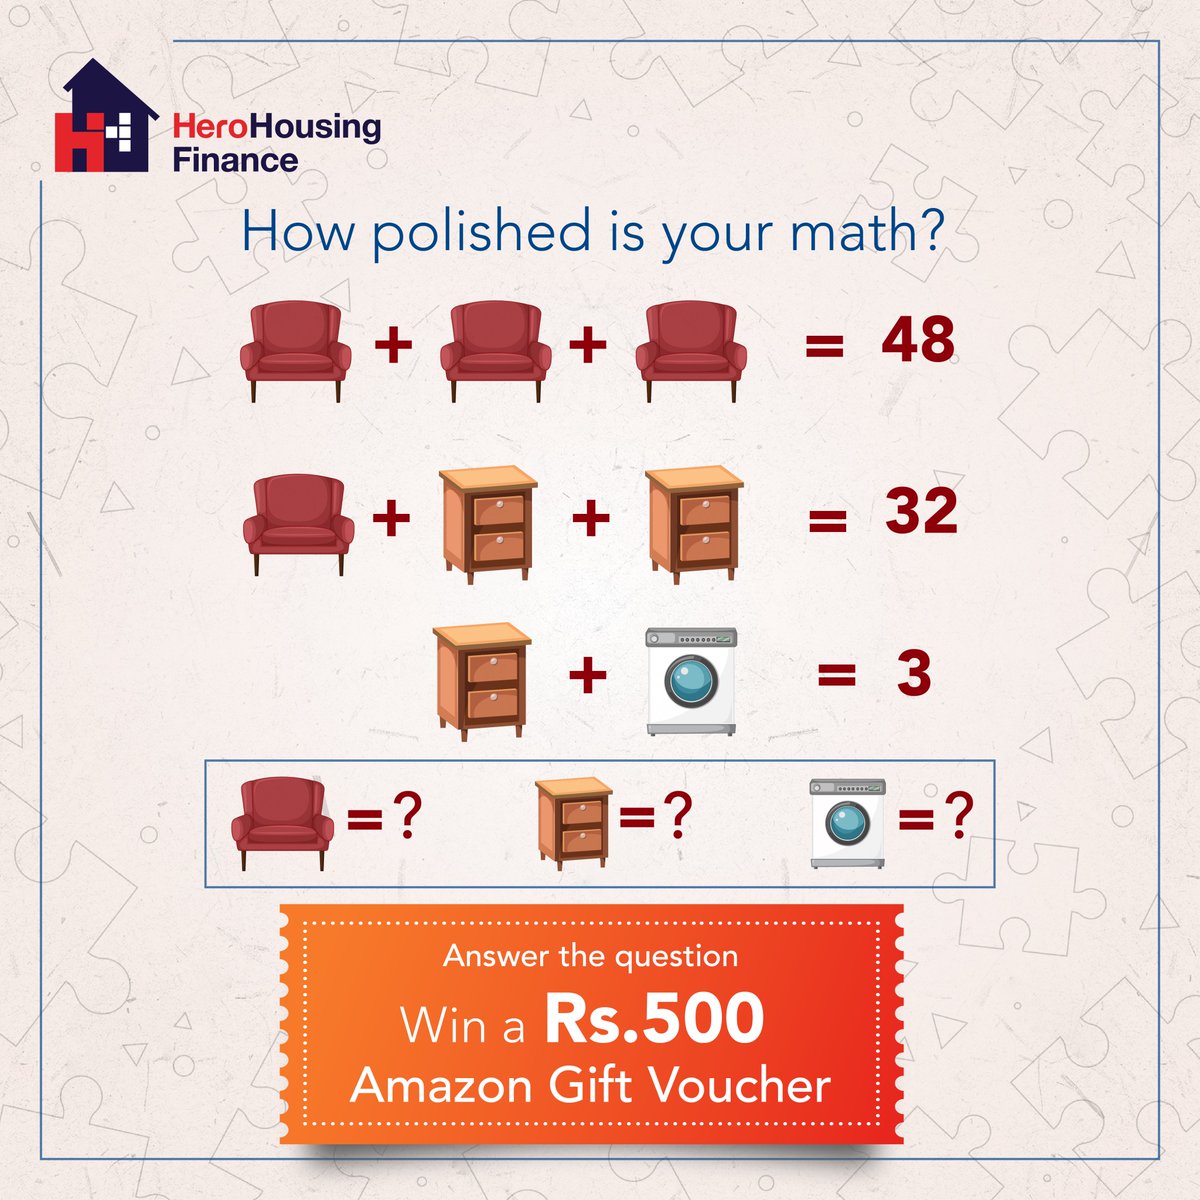 You don’t have to be a math geek for this contest! Let us know what number each element stands for and win an Rs.500 Amazon Gift Voucher! #ContestAlert #ContestPost #AmazonVouchers #HomeLoan #HeroHousingFinance